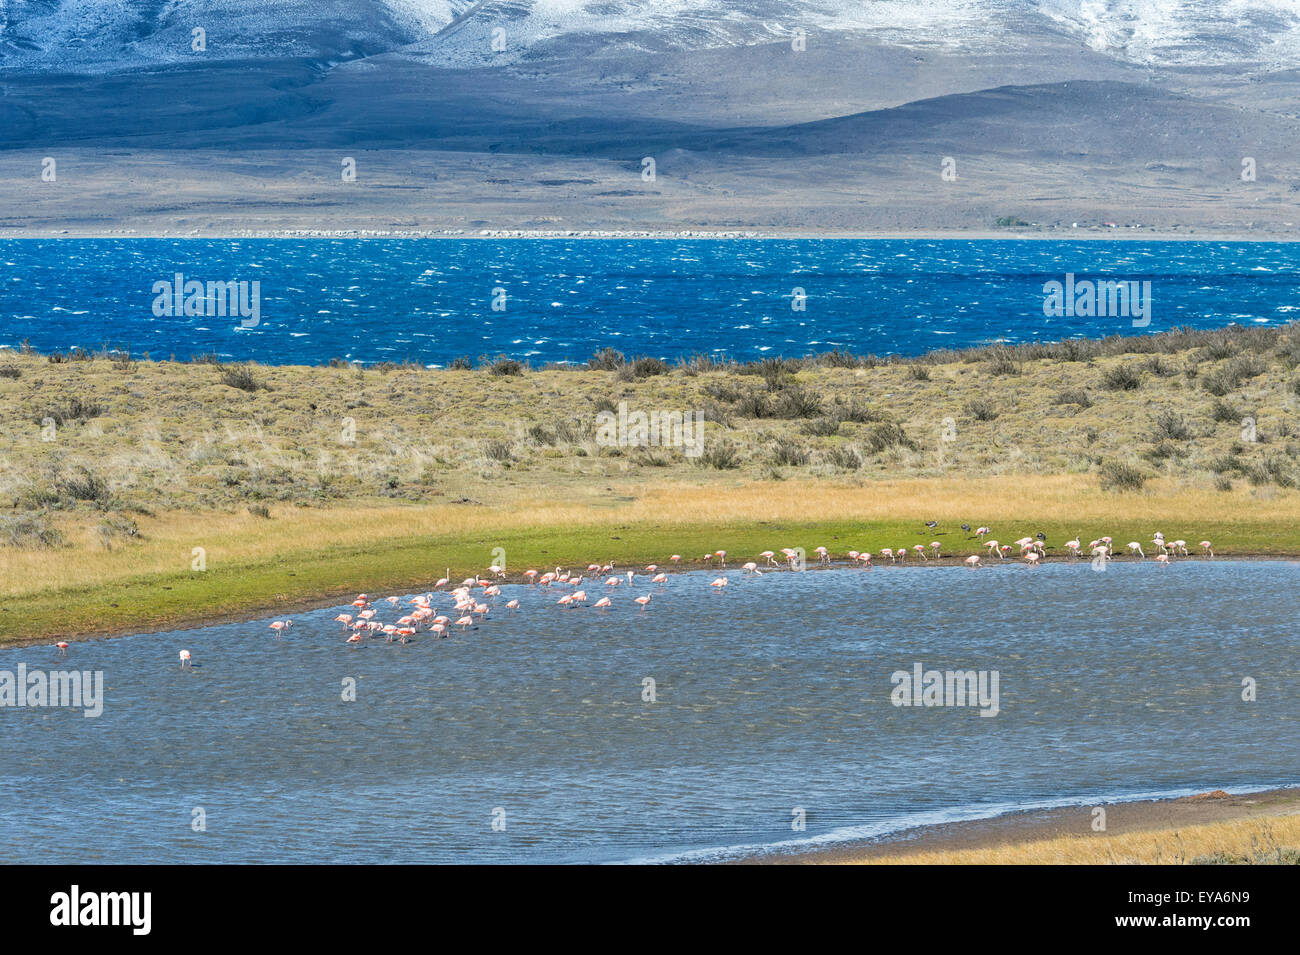 Chilean flamingos (Phoenicopterus chilensis), in Torres del Paine National Park, Chilean Patagonia, Chile Stock Photo